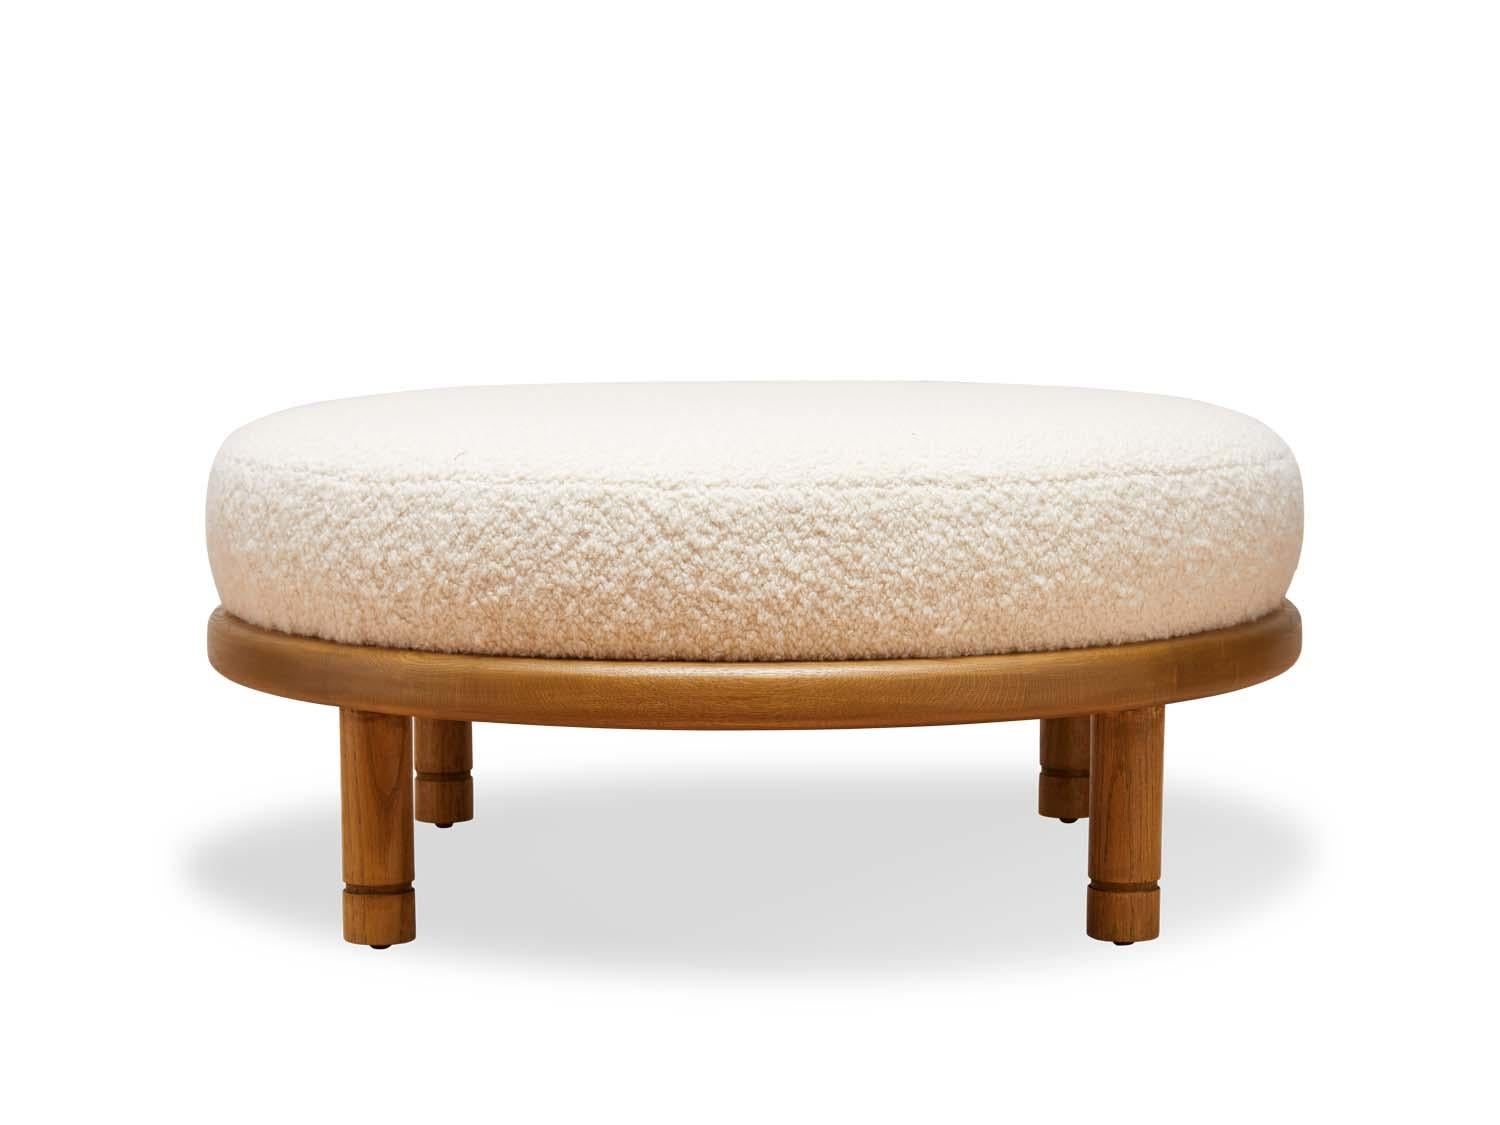 The Moreno Ottoman features a round solid wood base with four cylindrical legs and an upholstered top. Available in American walnut or white oak. Shown here in natural oak. Shown here in White Alpaca Bouclé and Oiled Oak. 

The Lawson-Fenning